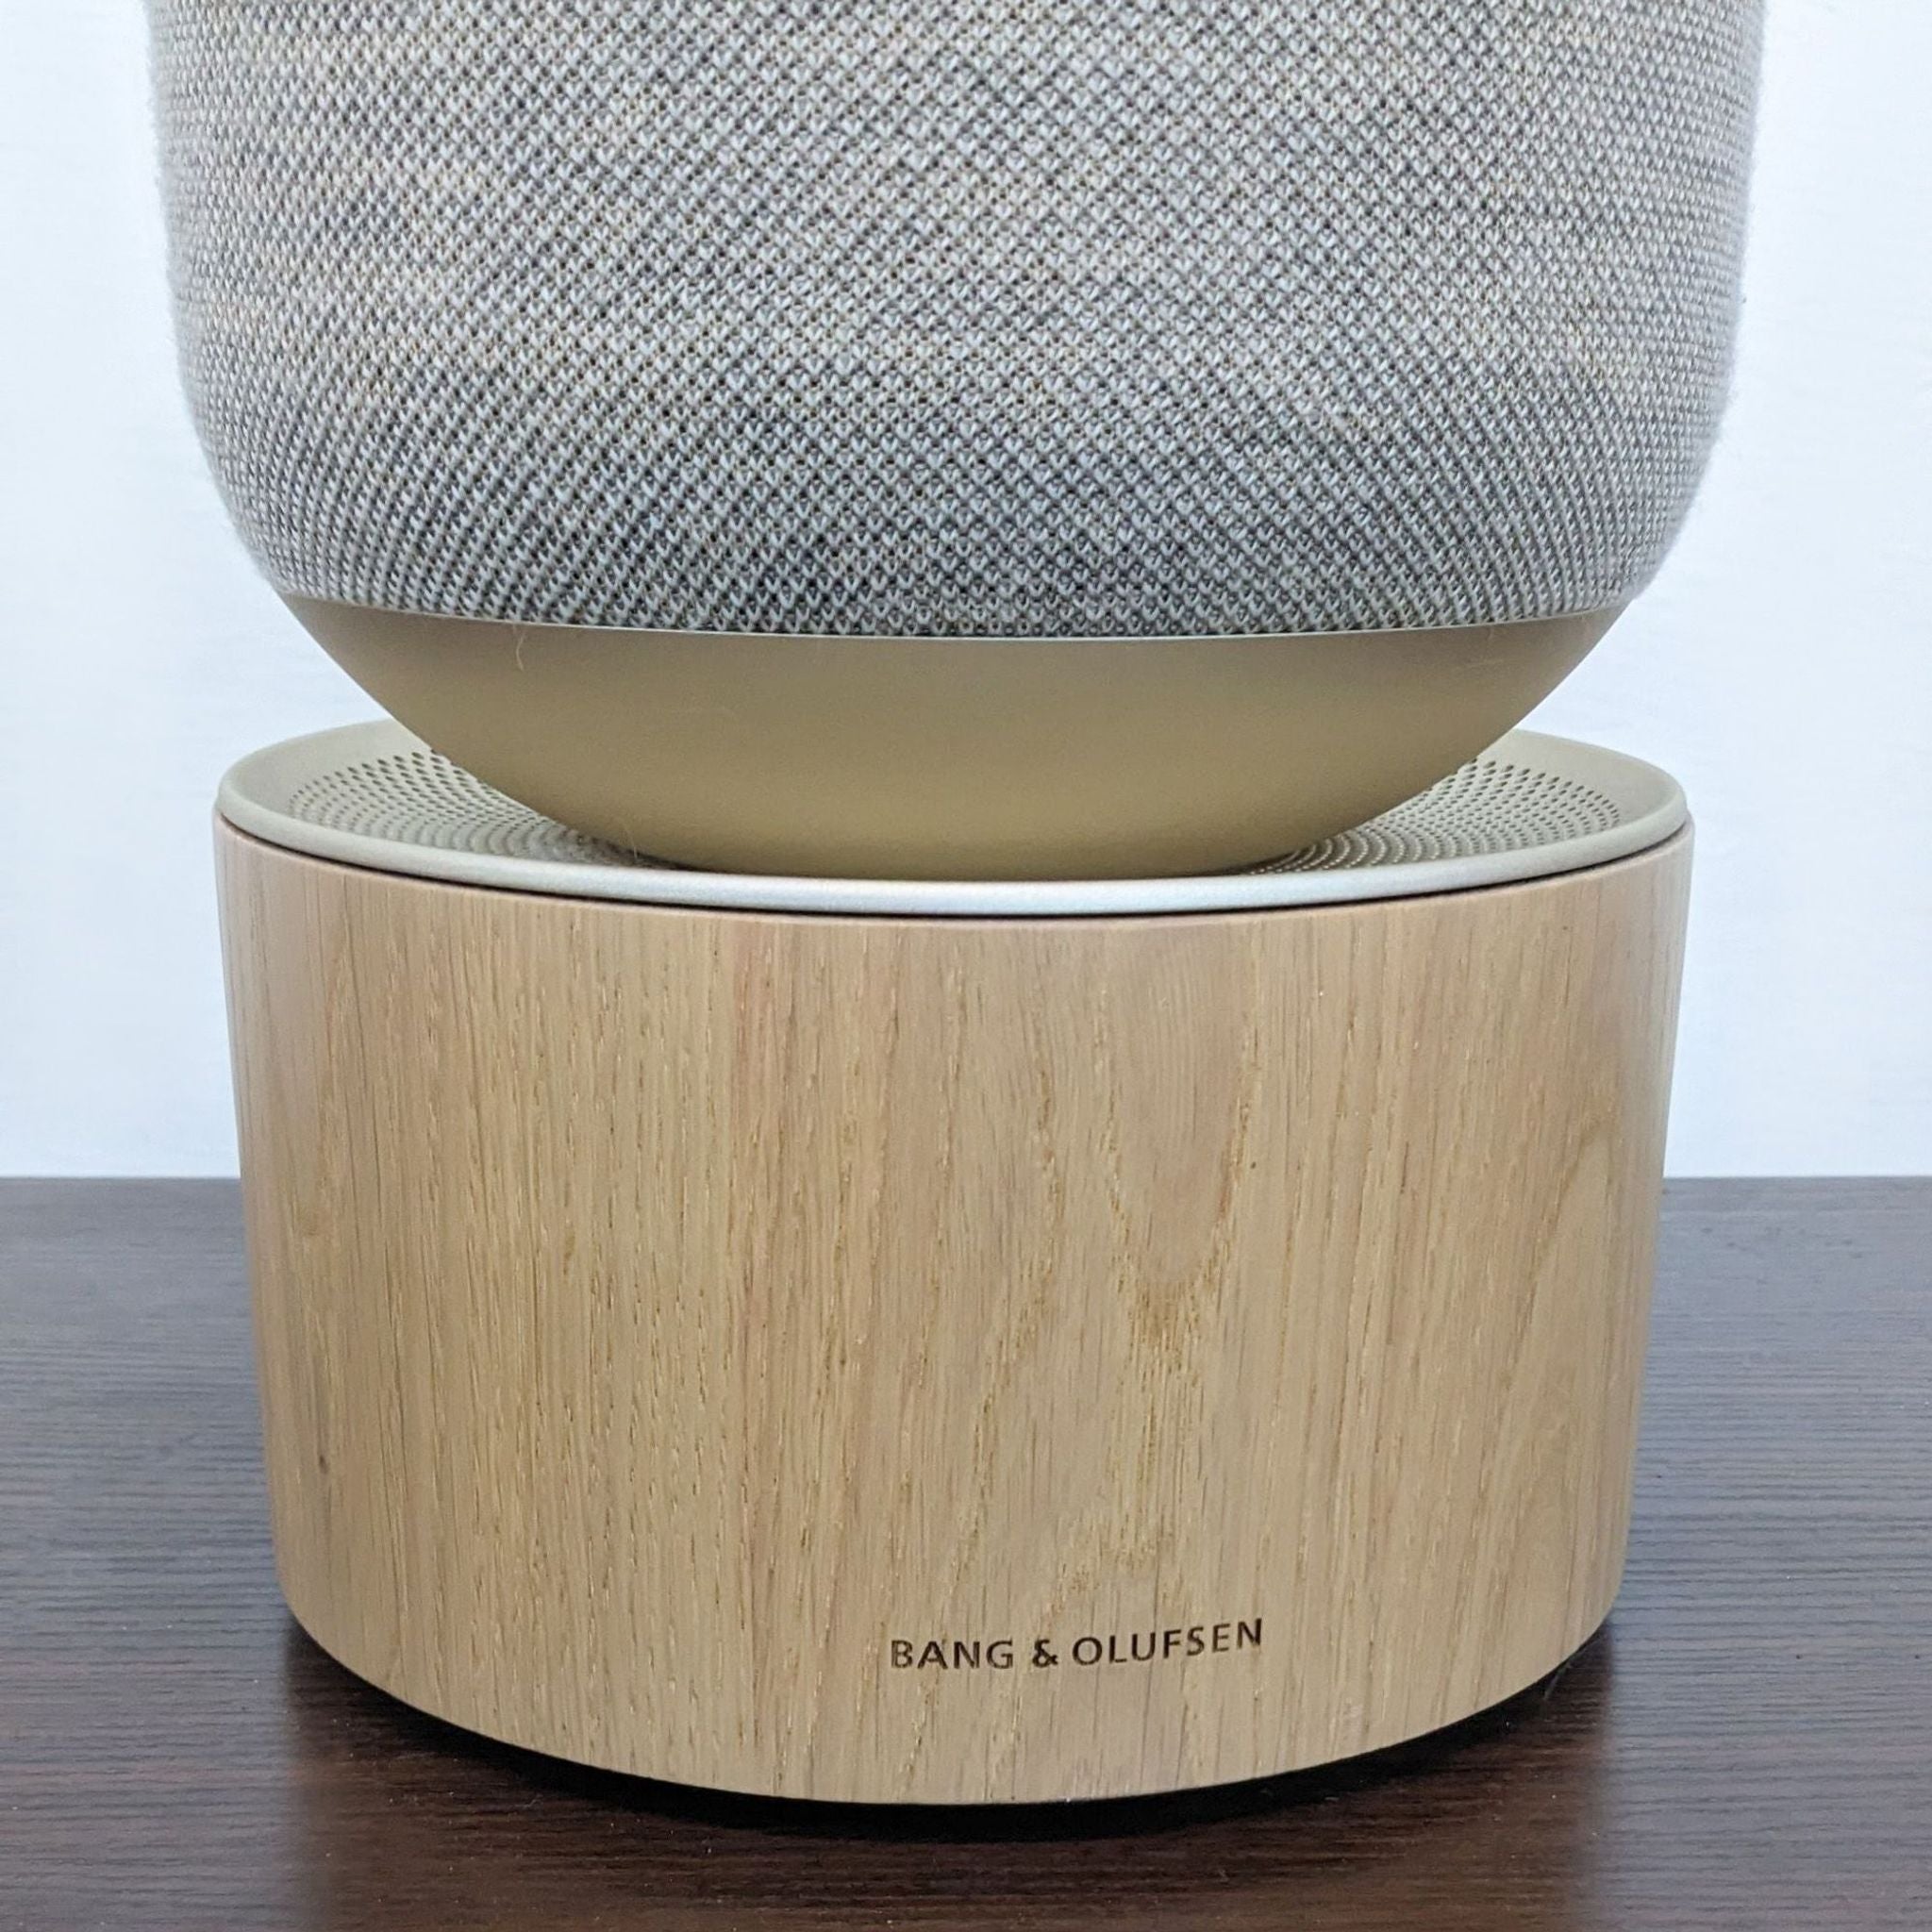 Close-up of Bang & Olufsen speaker's wooden base with brand logo, on dark table.